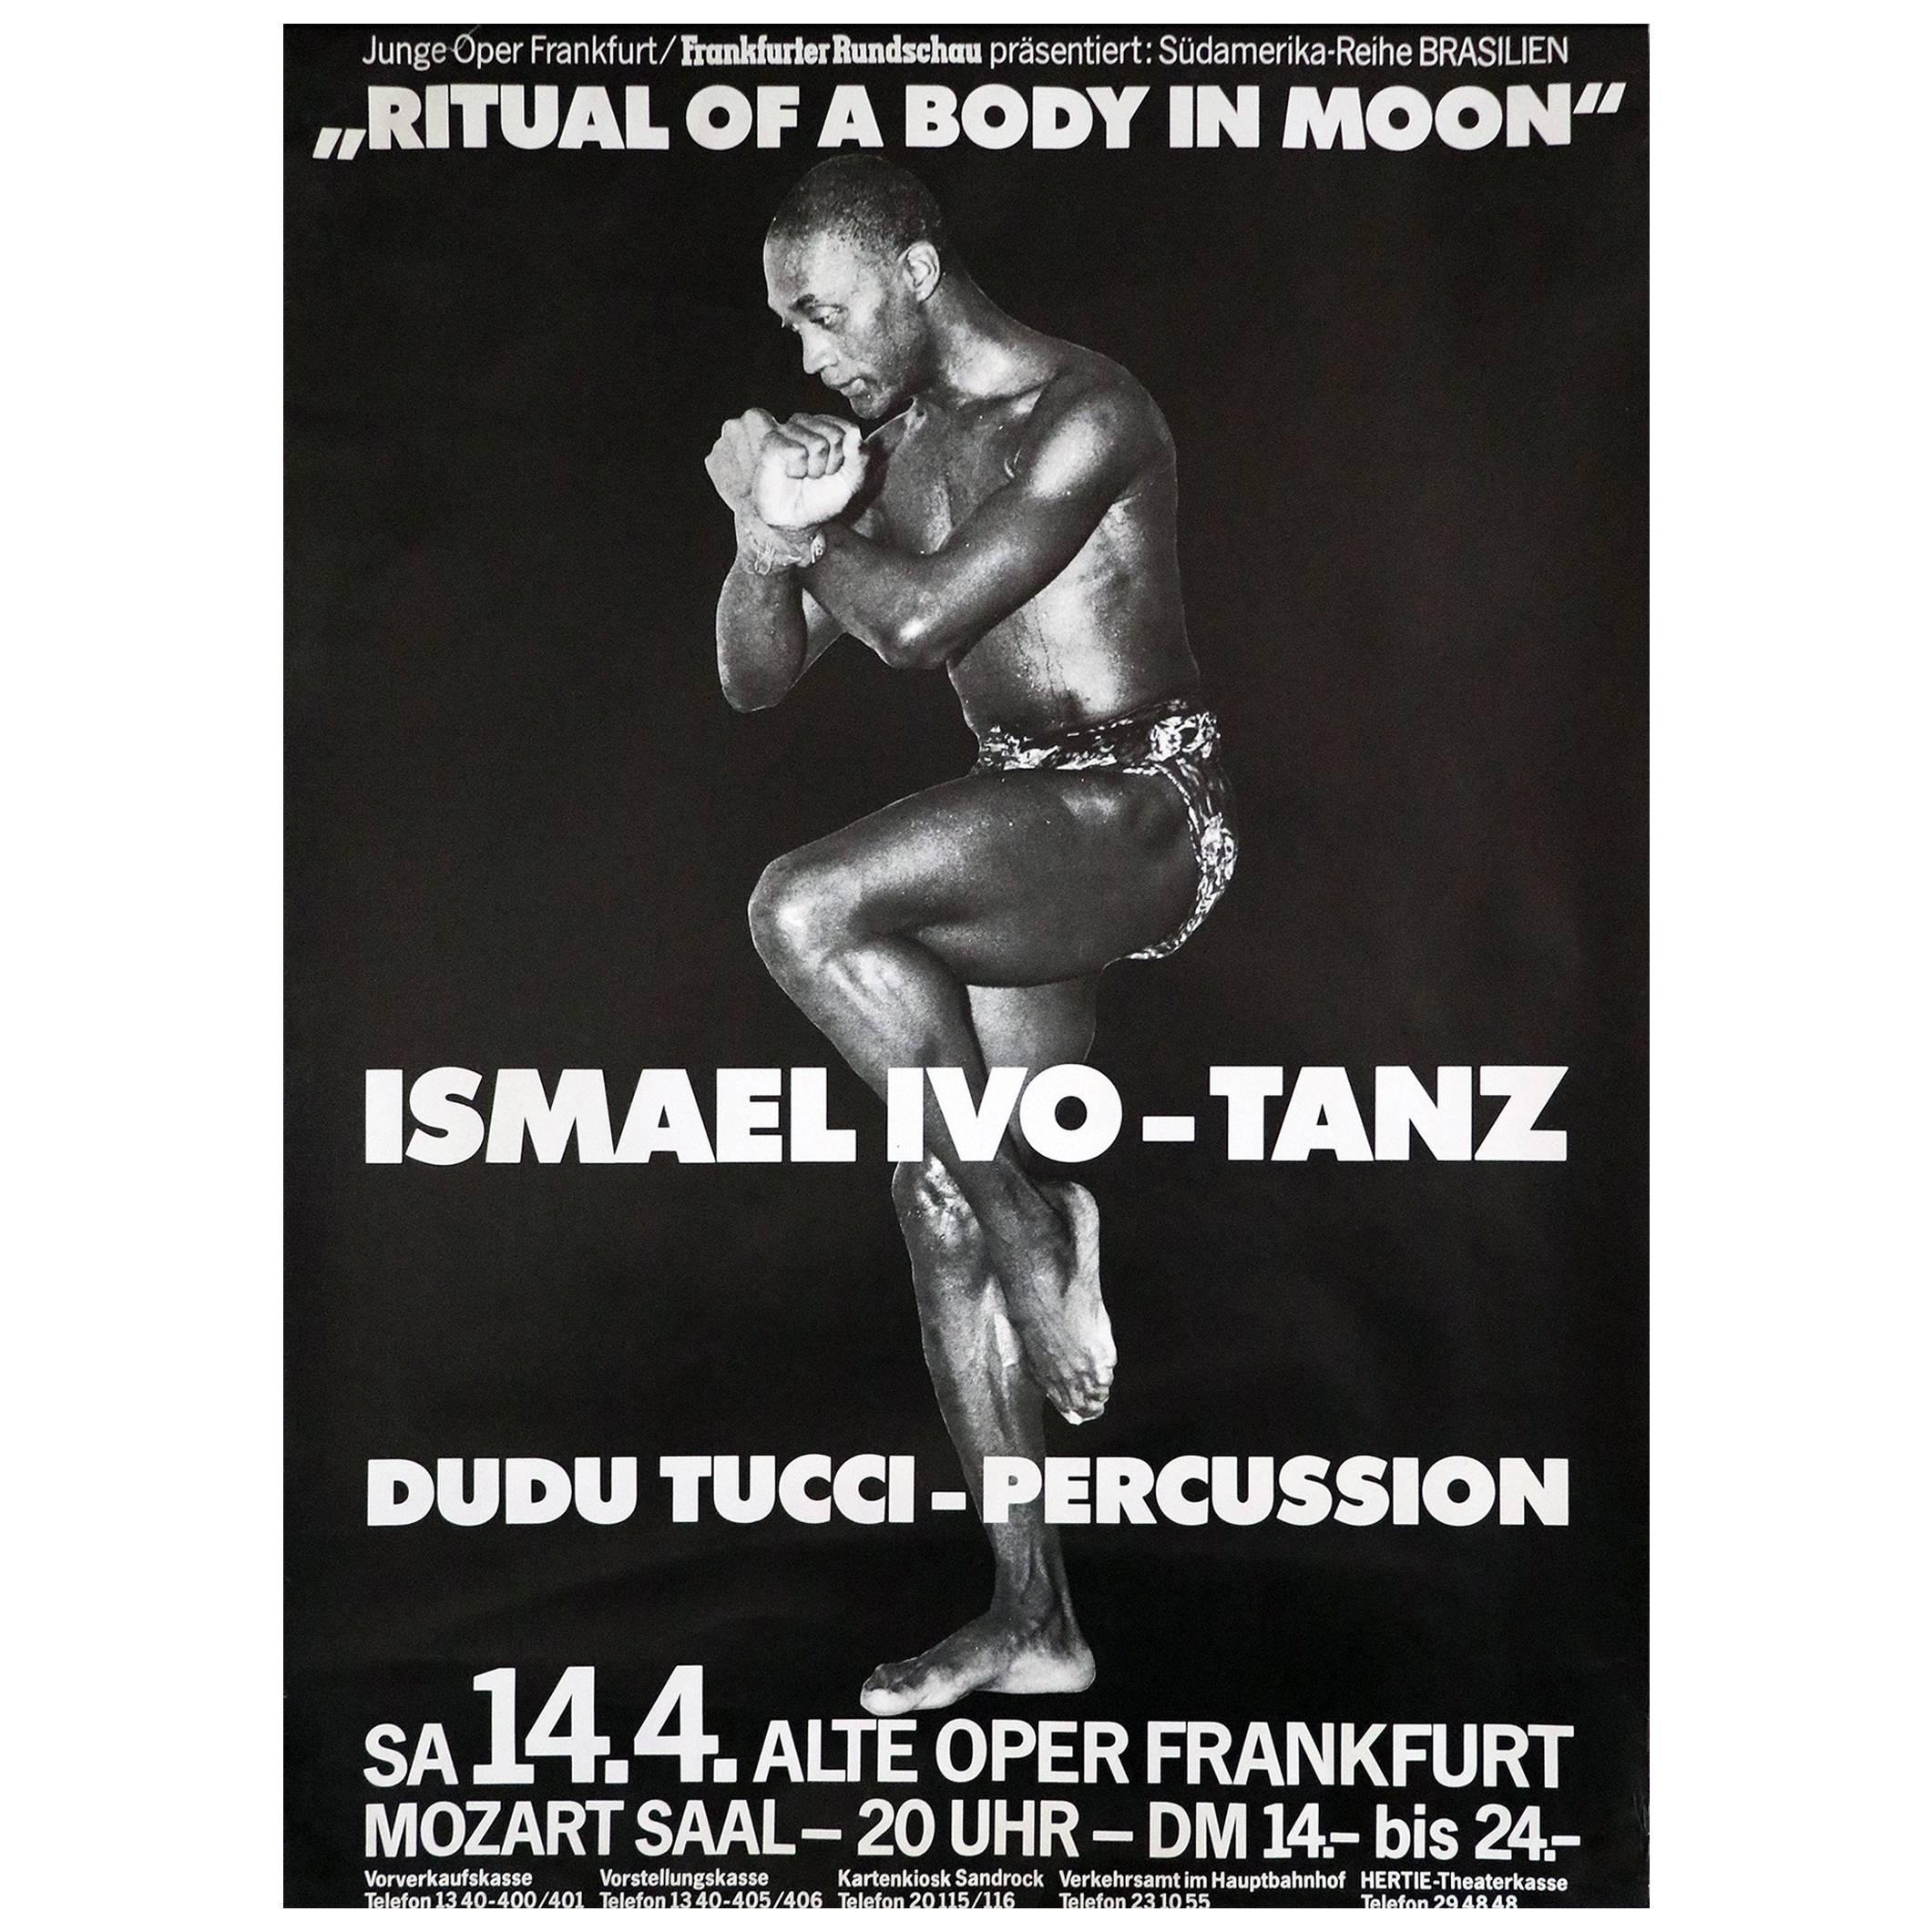 Original Poster "Ismael Ivo, Ritual of a Body in Moon", 1980s For Sale